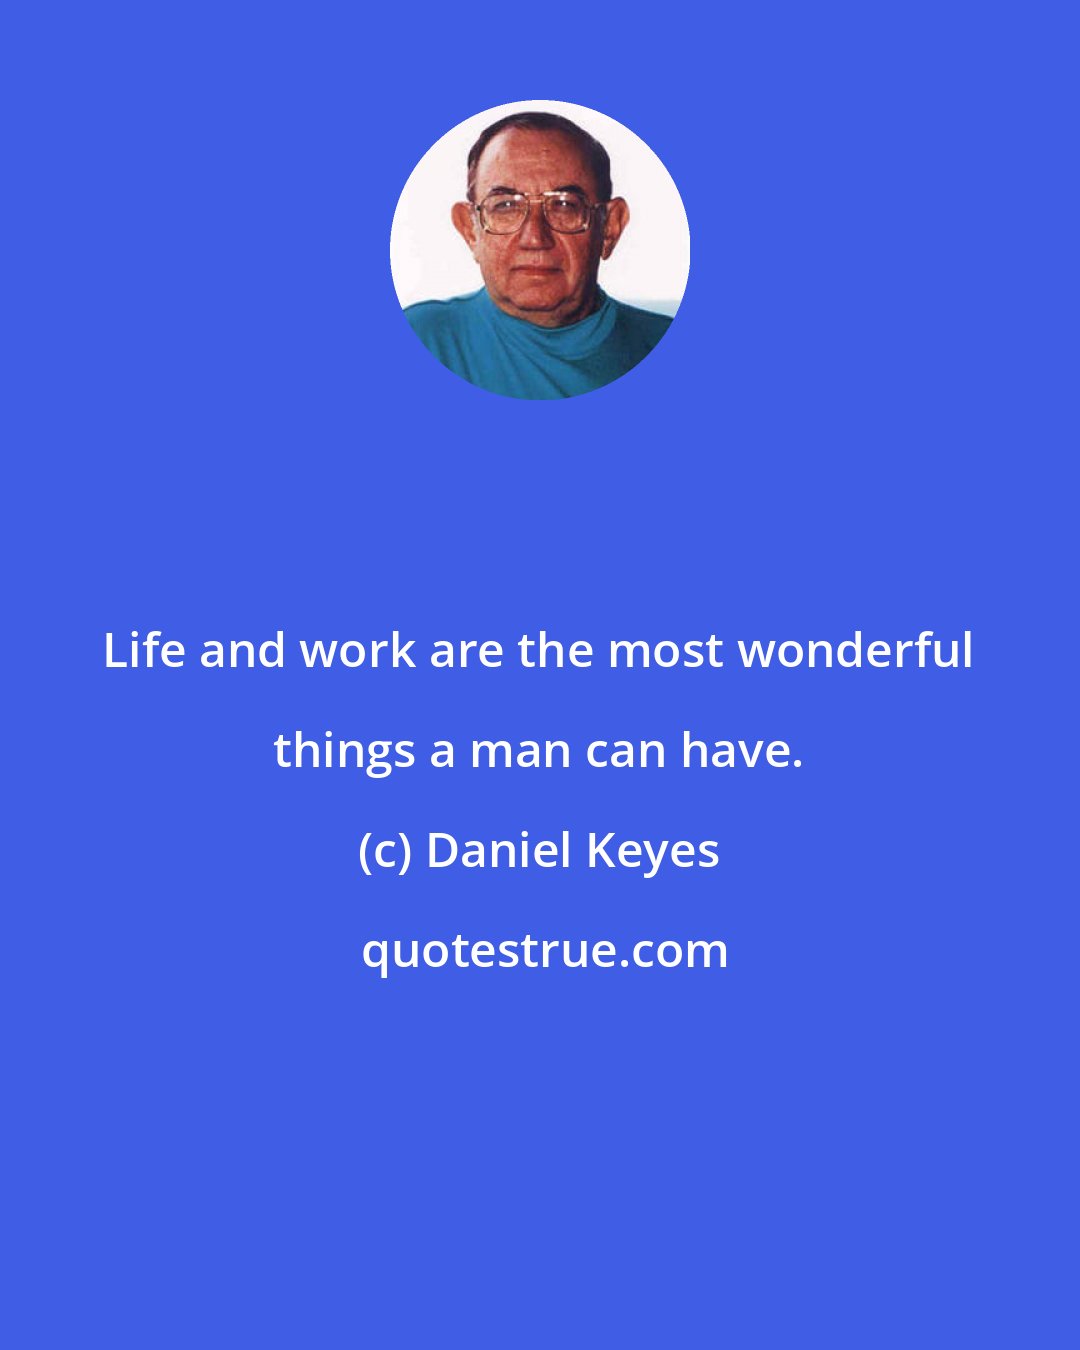 Daniel Keyes: Life and work are the most wonderful things a man can have.